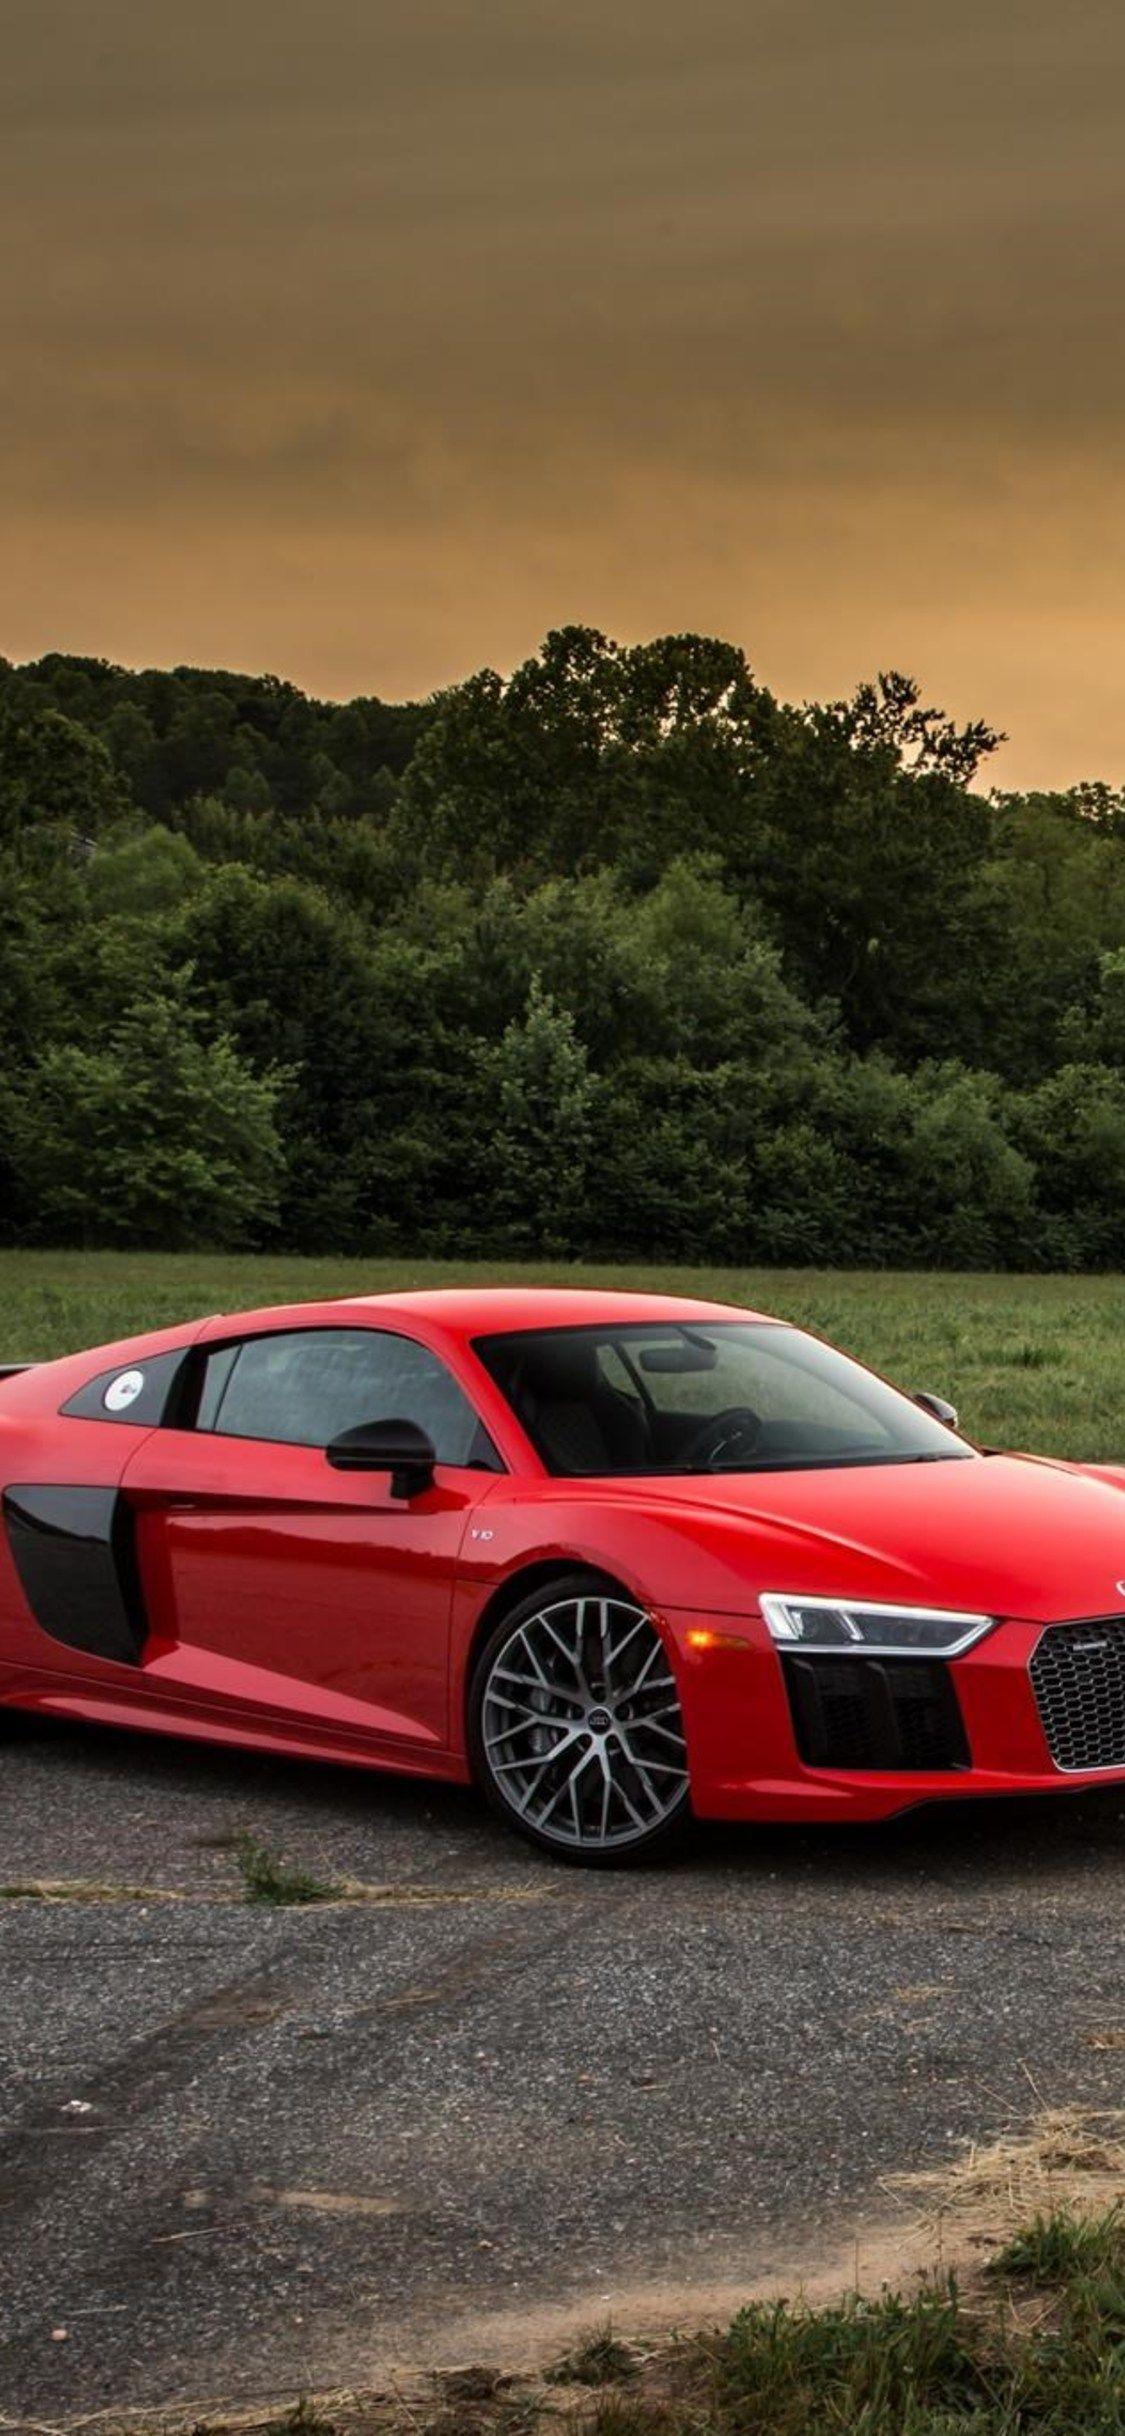 Audi R8 Iphone Wallpapers Top Free Audi R8 Iphone Backgrounds